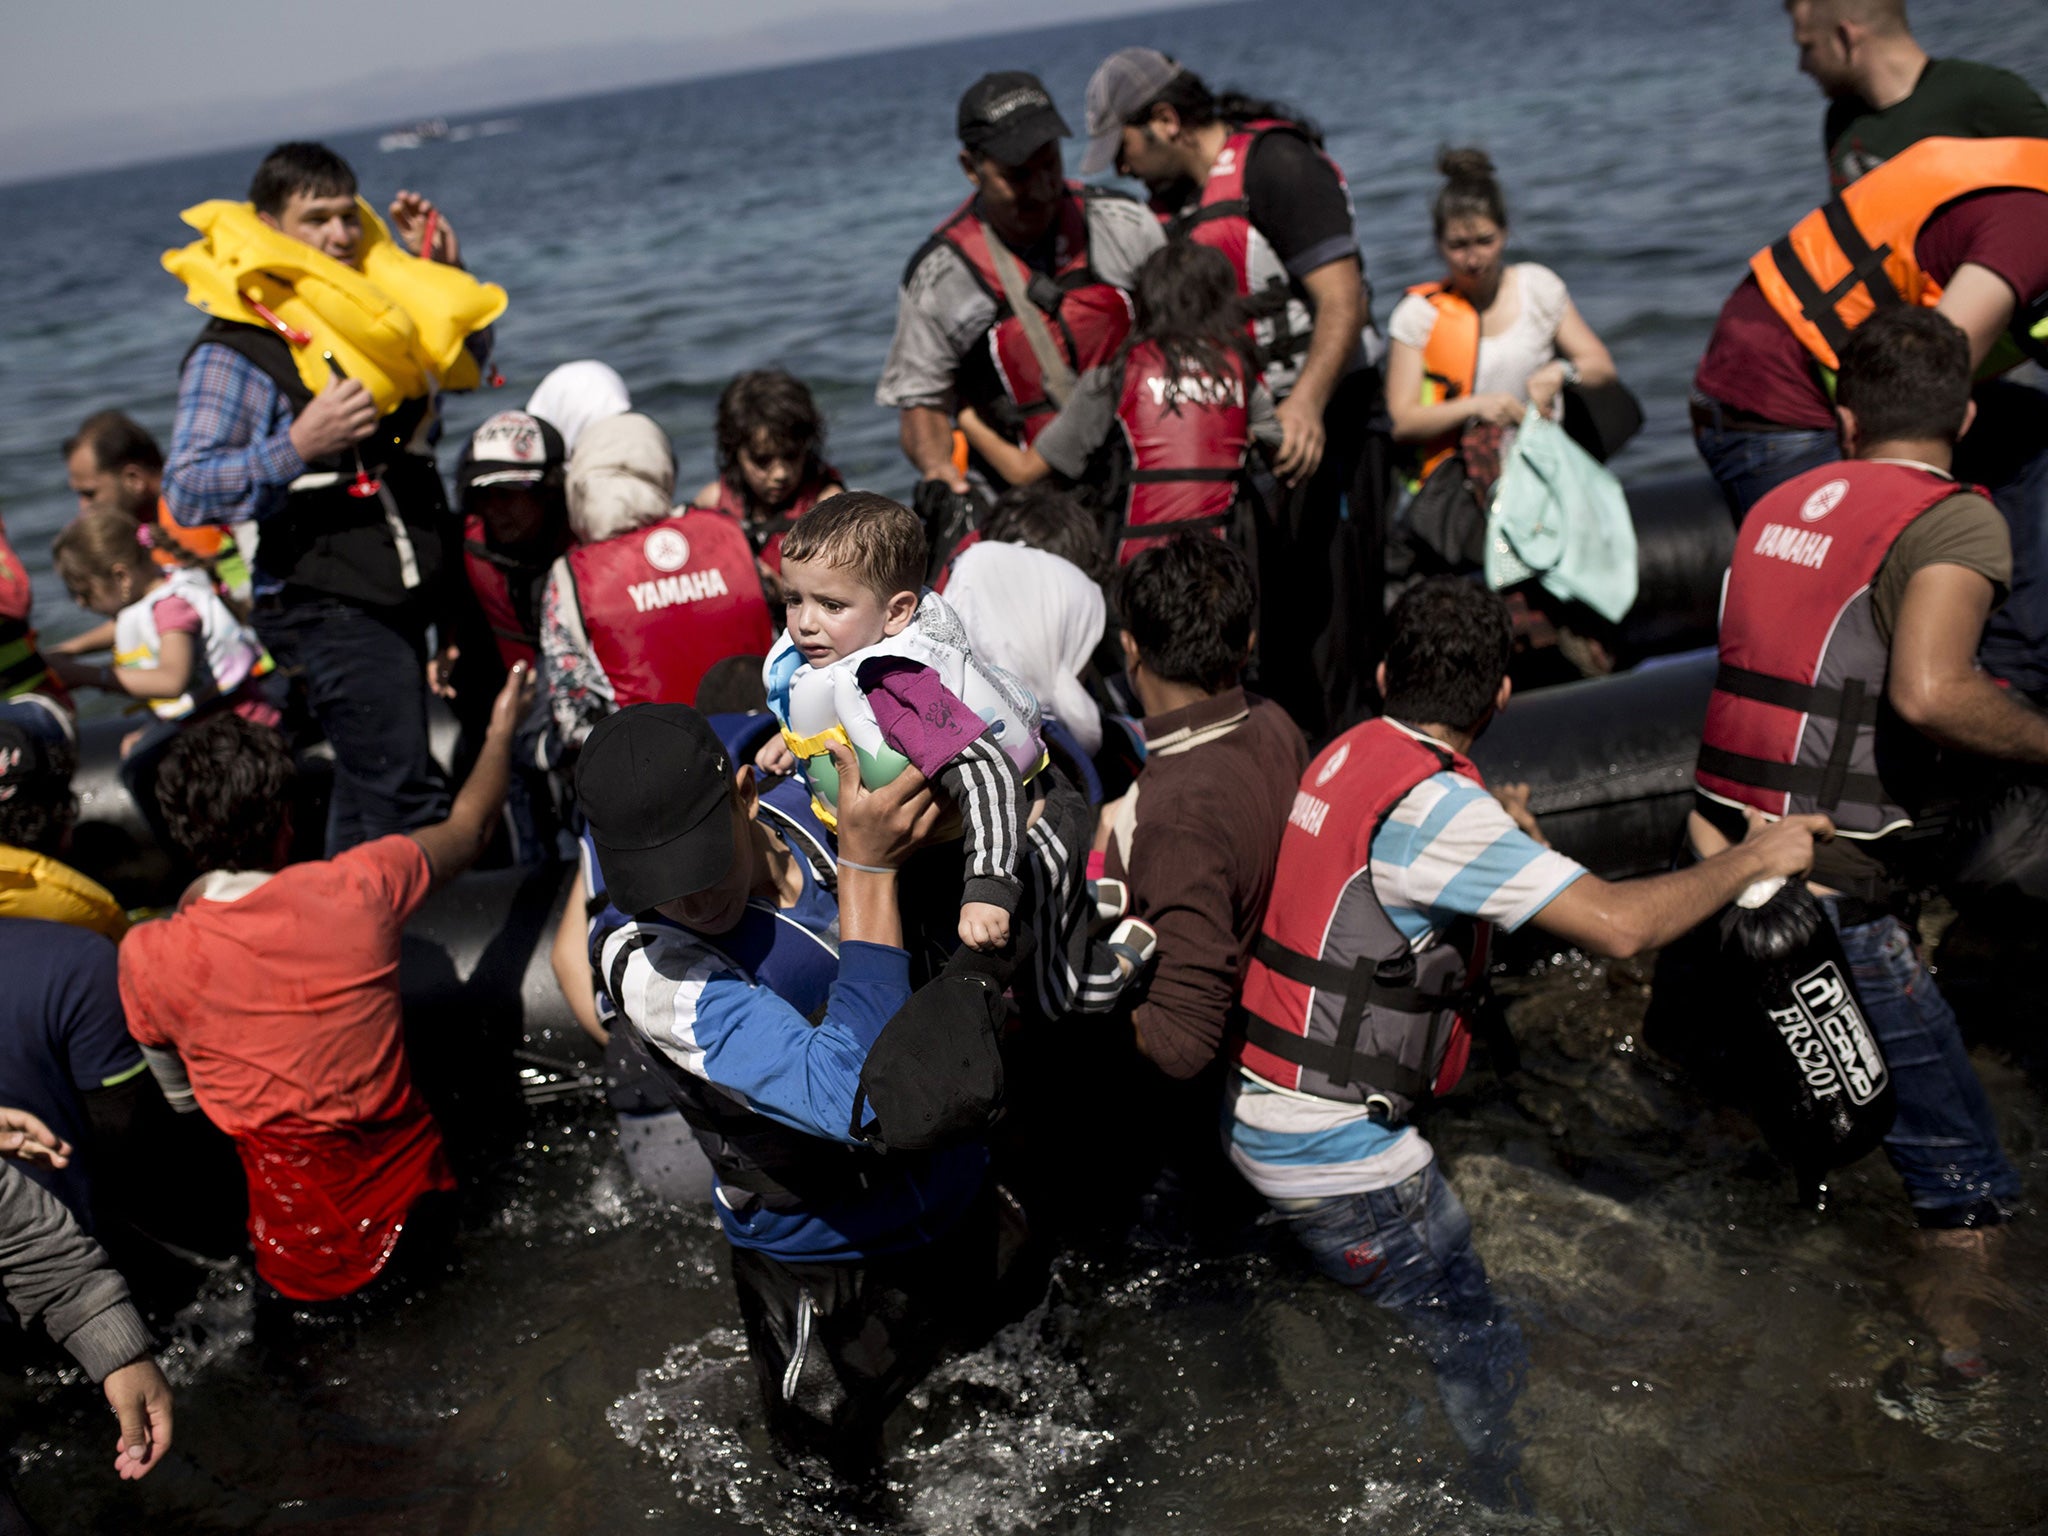 Syrian refugees arrive on the shores of the Greek island of Lesbos after crossing the Aegean Sea from Turkey on a inflatable dinghy on September 11, 2015